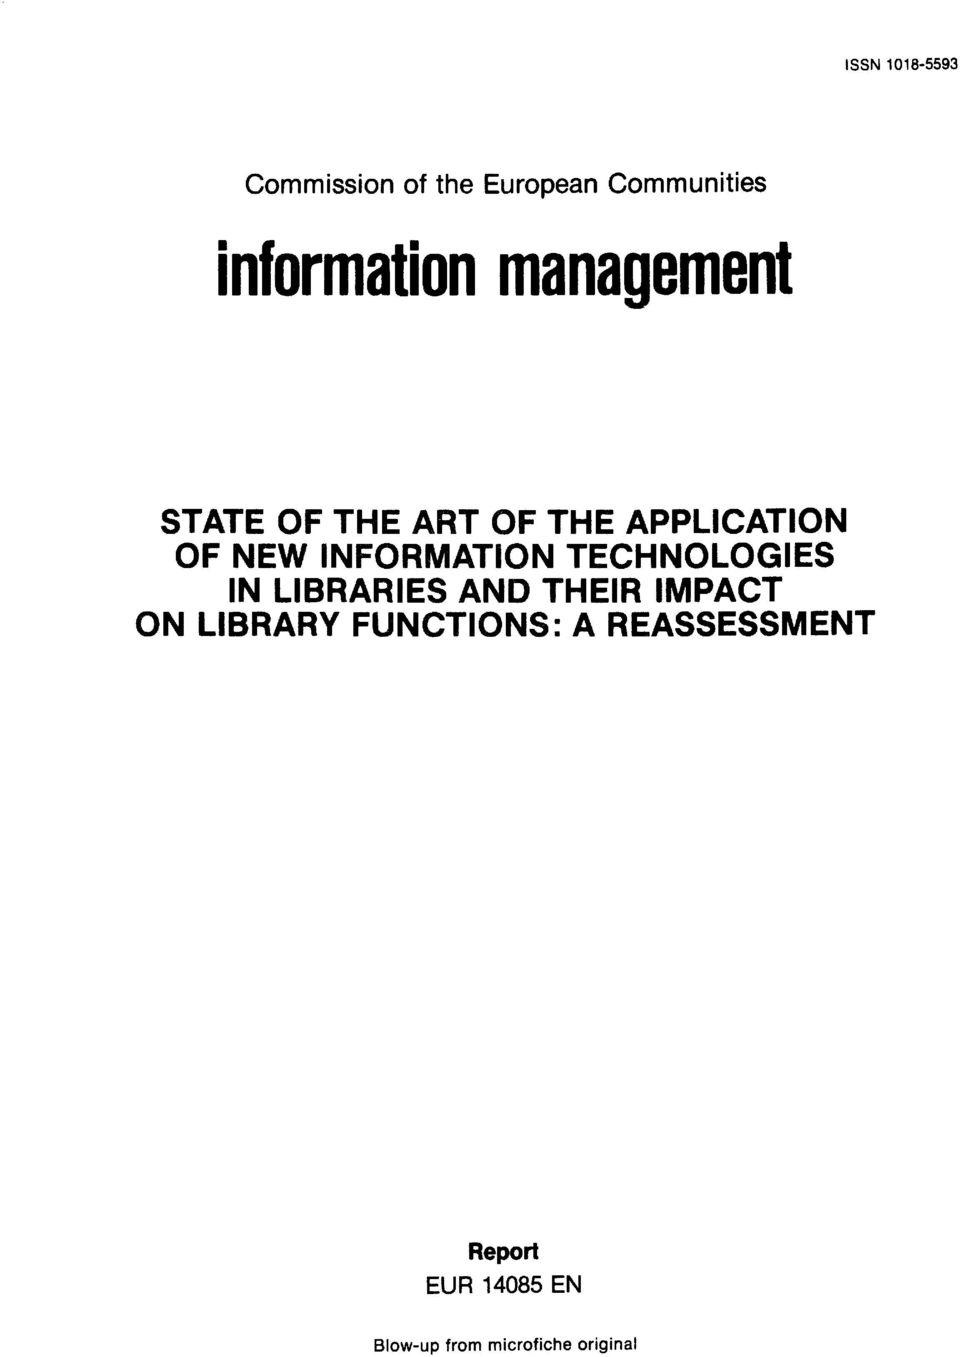 INFORMATION TECHNOLOGIES IN LIBRARIES AND THEIR IMPACT ON LIBRARY